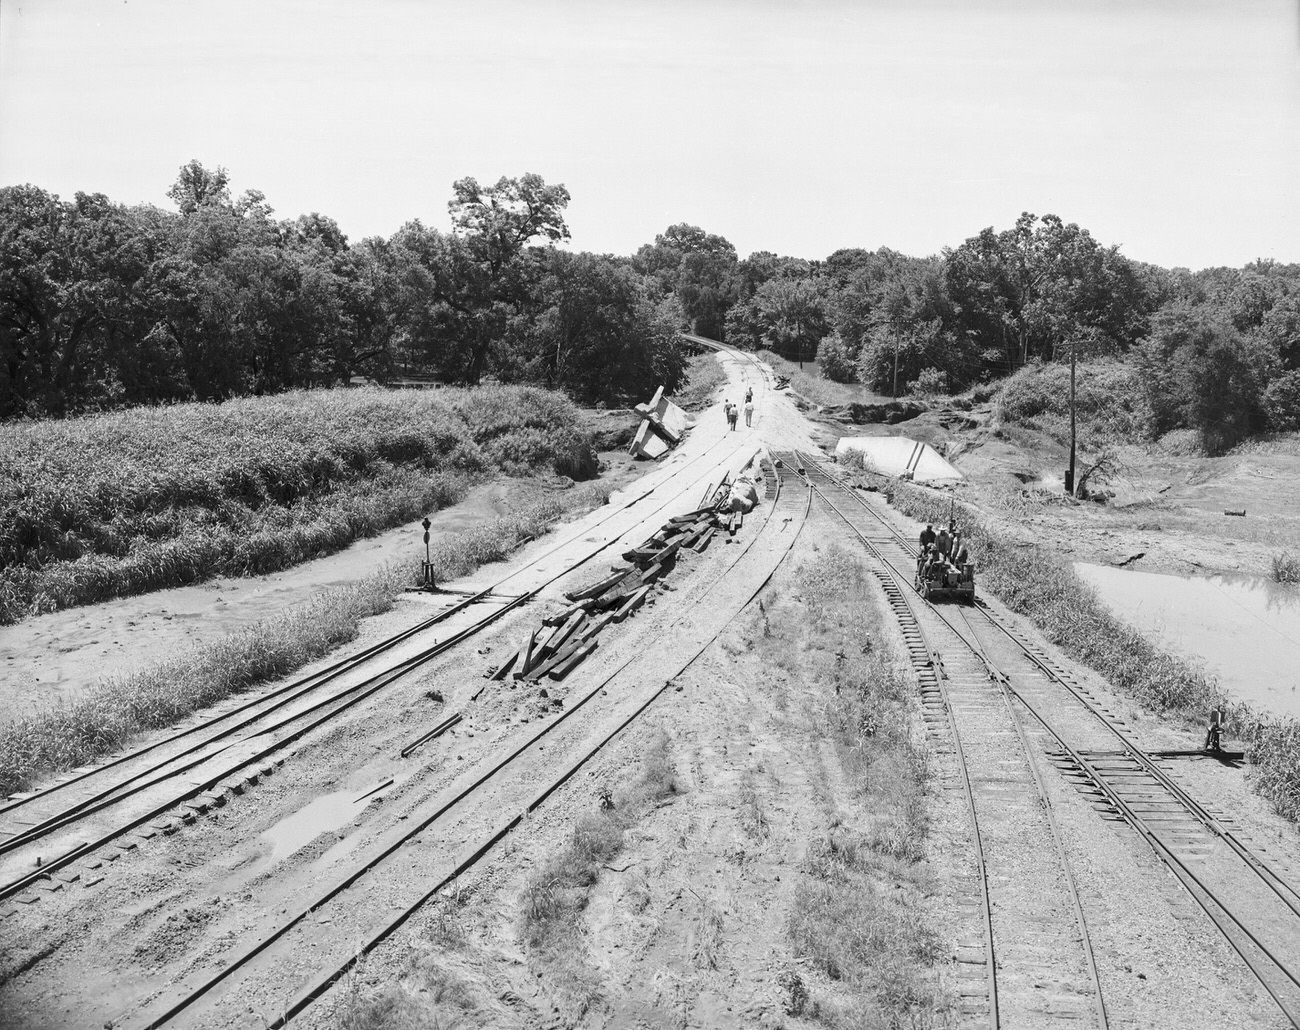 Flood damage looking south at the Frisco Railroad tracks, 1949